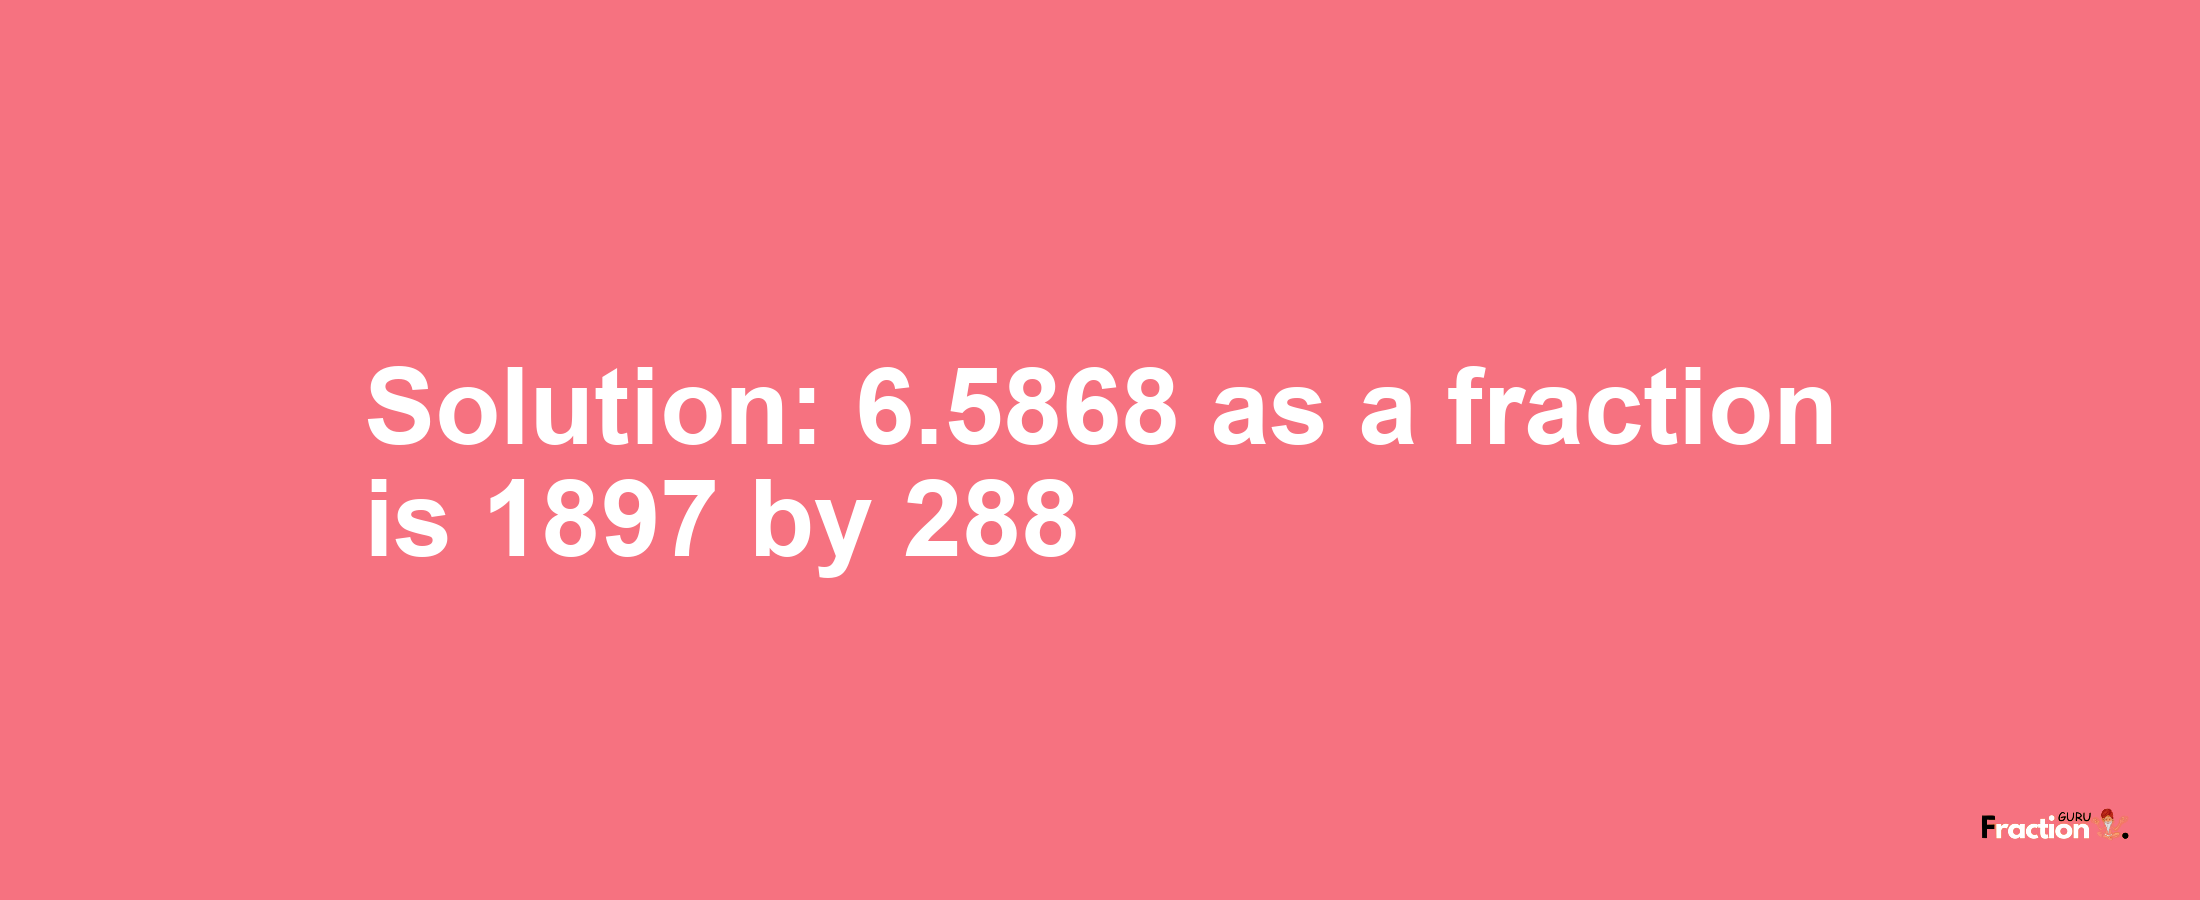 Solution:6.5868 as a fraction is 1897/288